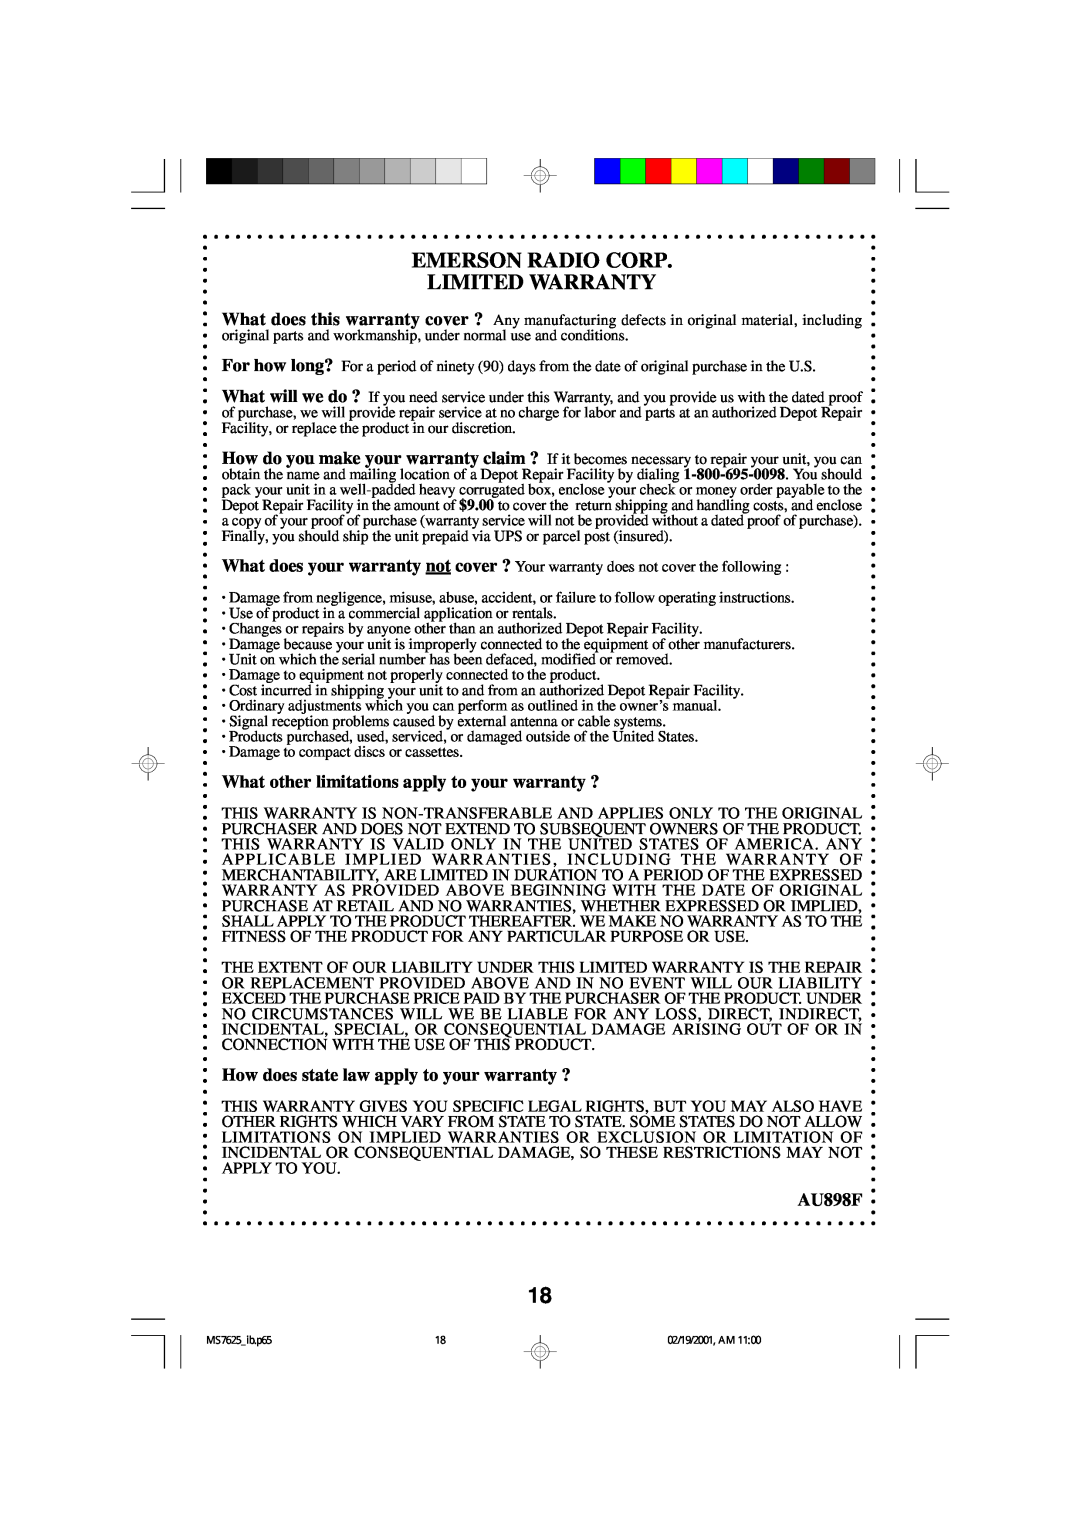 Emerson MS7625 owner manual Emerson Radio Corp Limited Warranty, What other limitations apply to your warranty ?, AU898F 